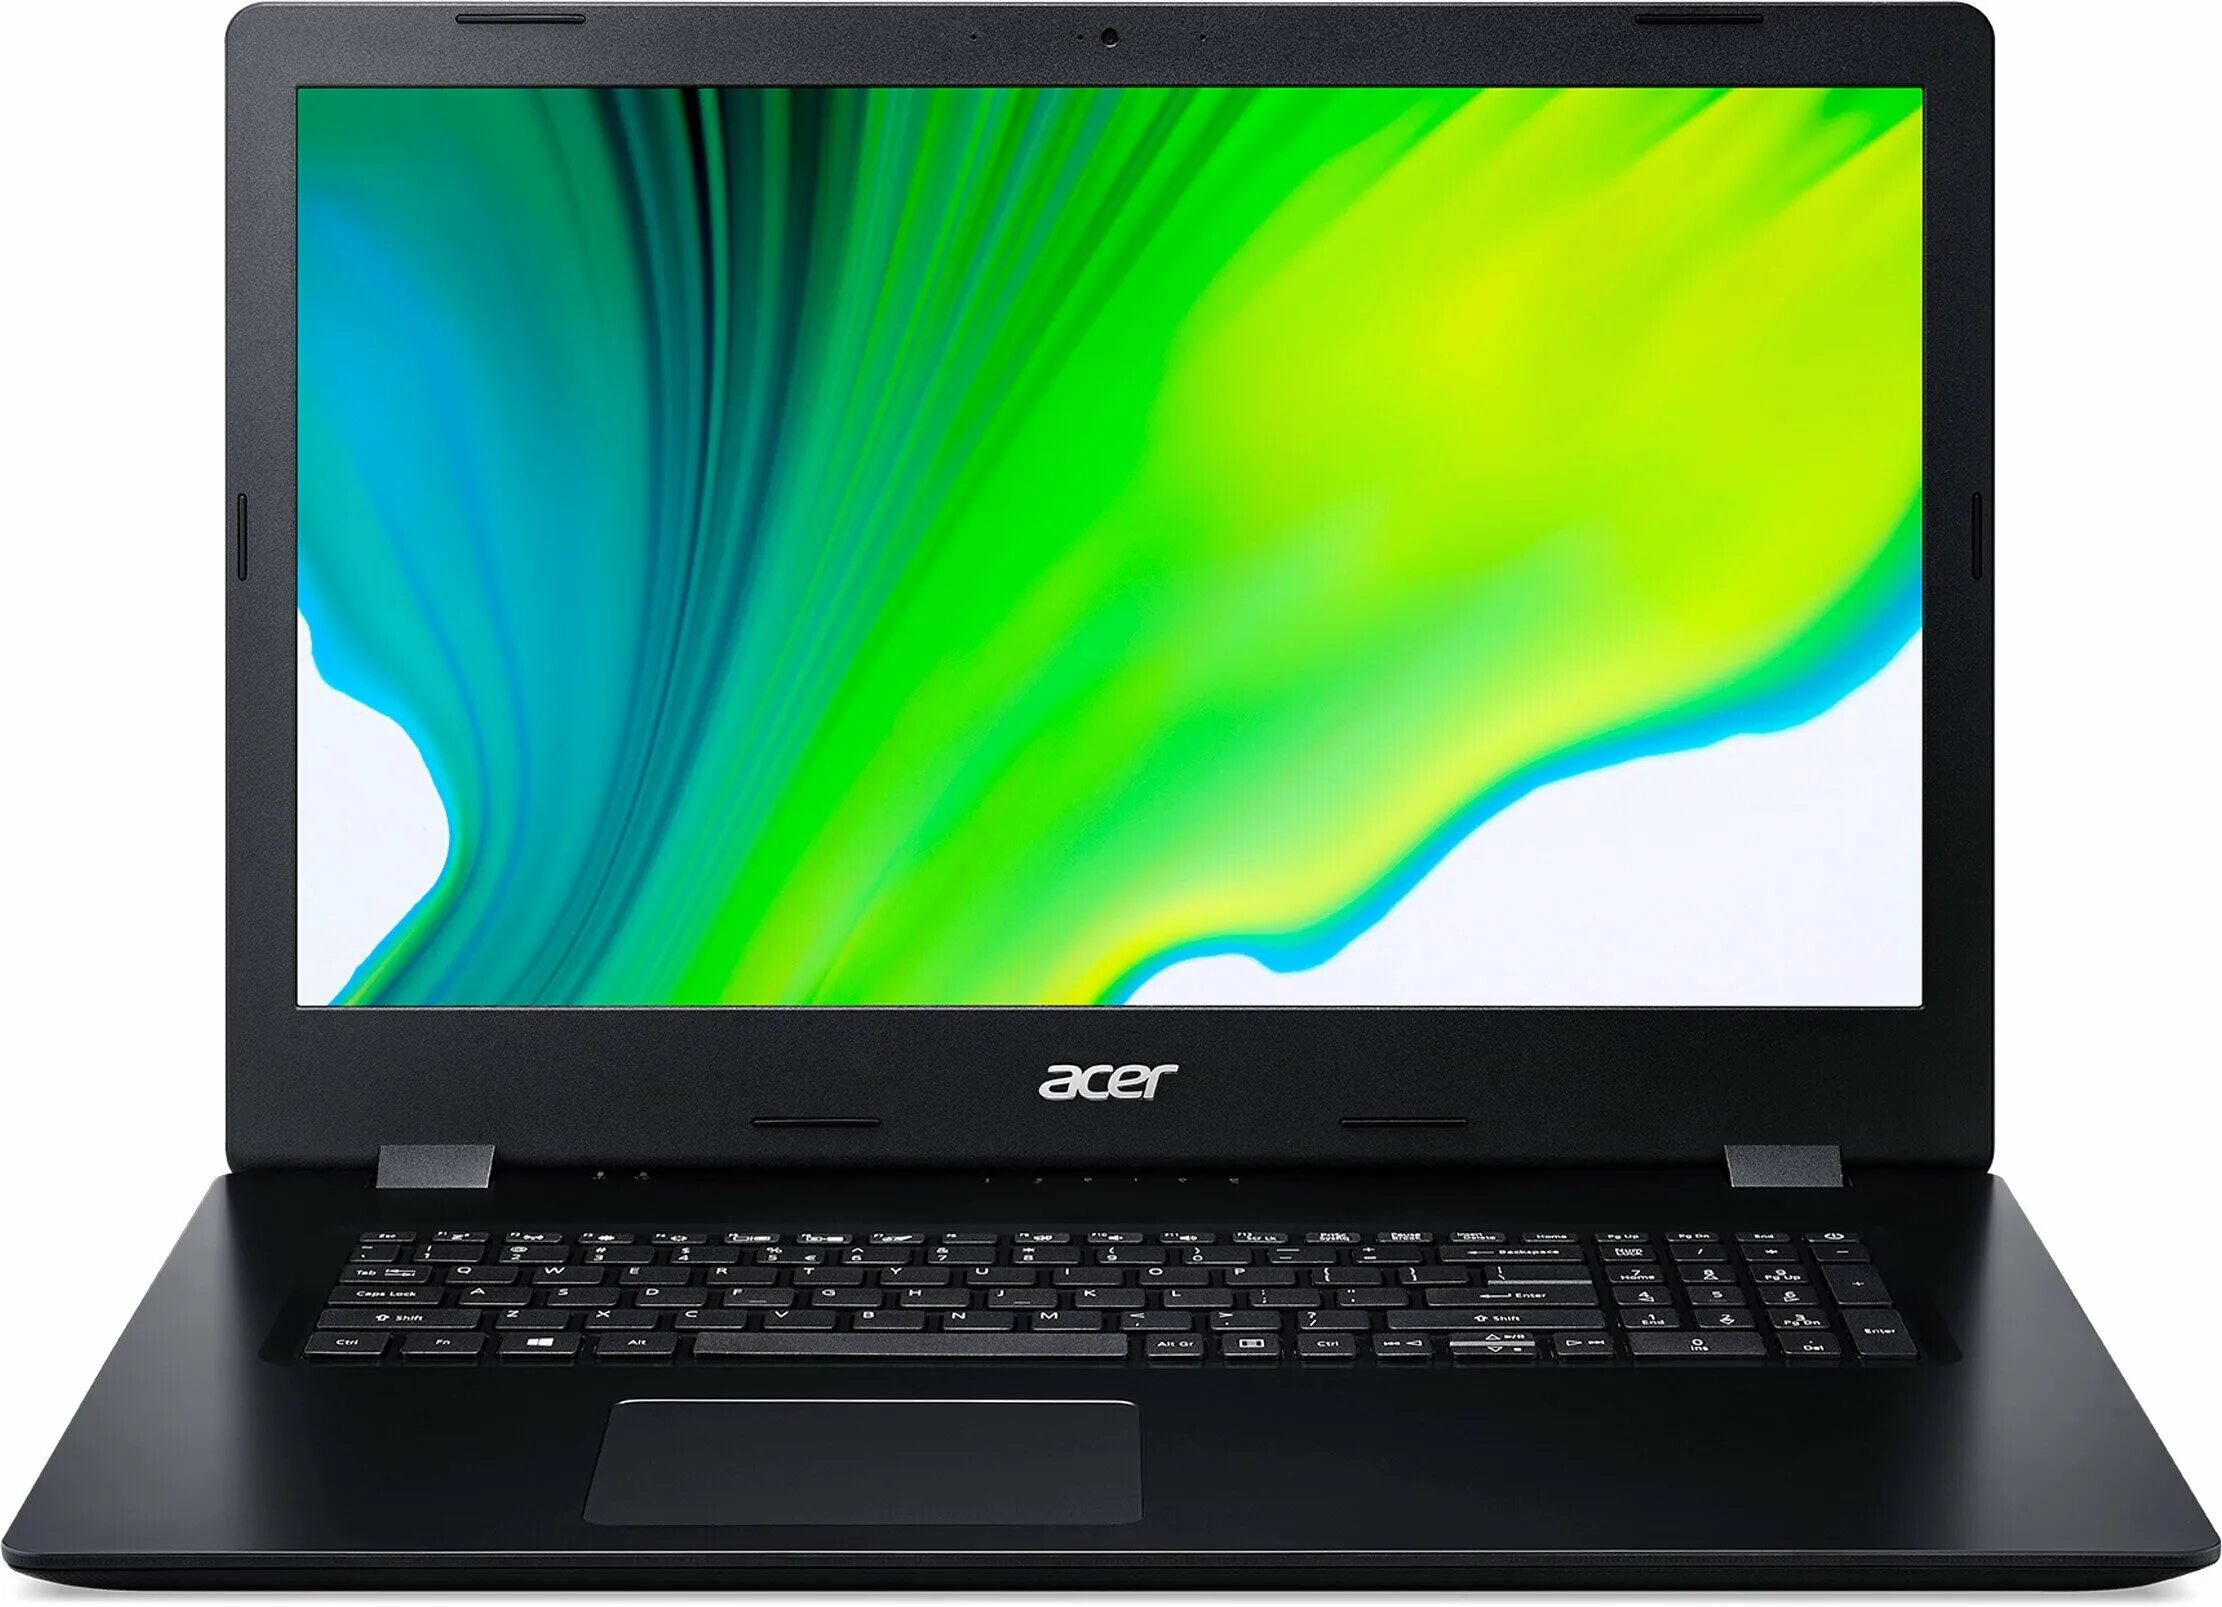 Aspire a515-56g. Acer Aspire a315. Aspire 5 a515-56g. Acer Aspire 7 a715-75g. Acer core i3 1115g4